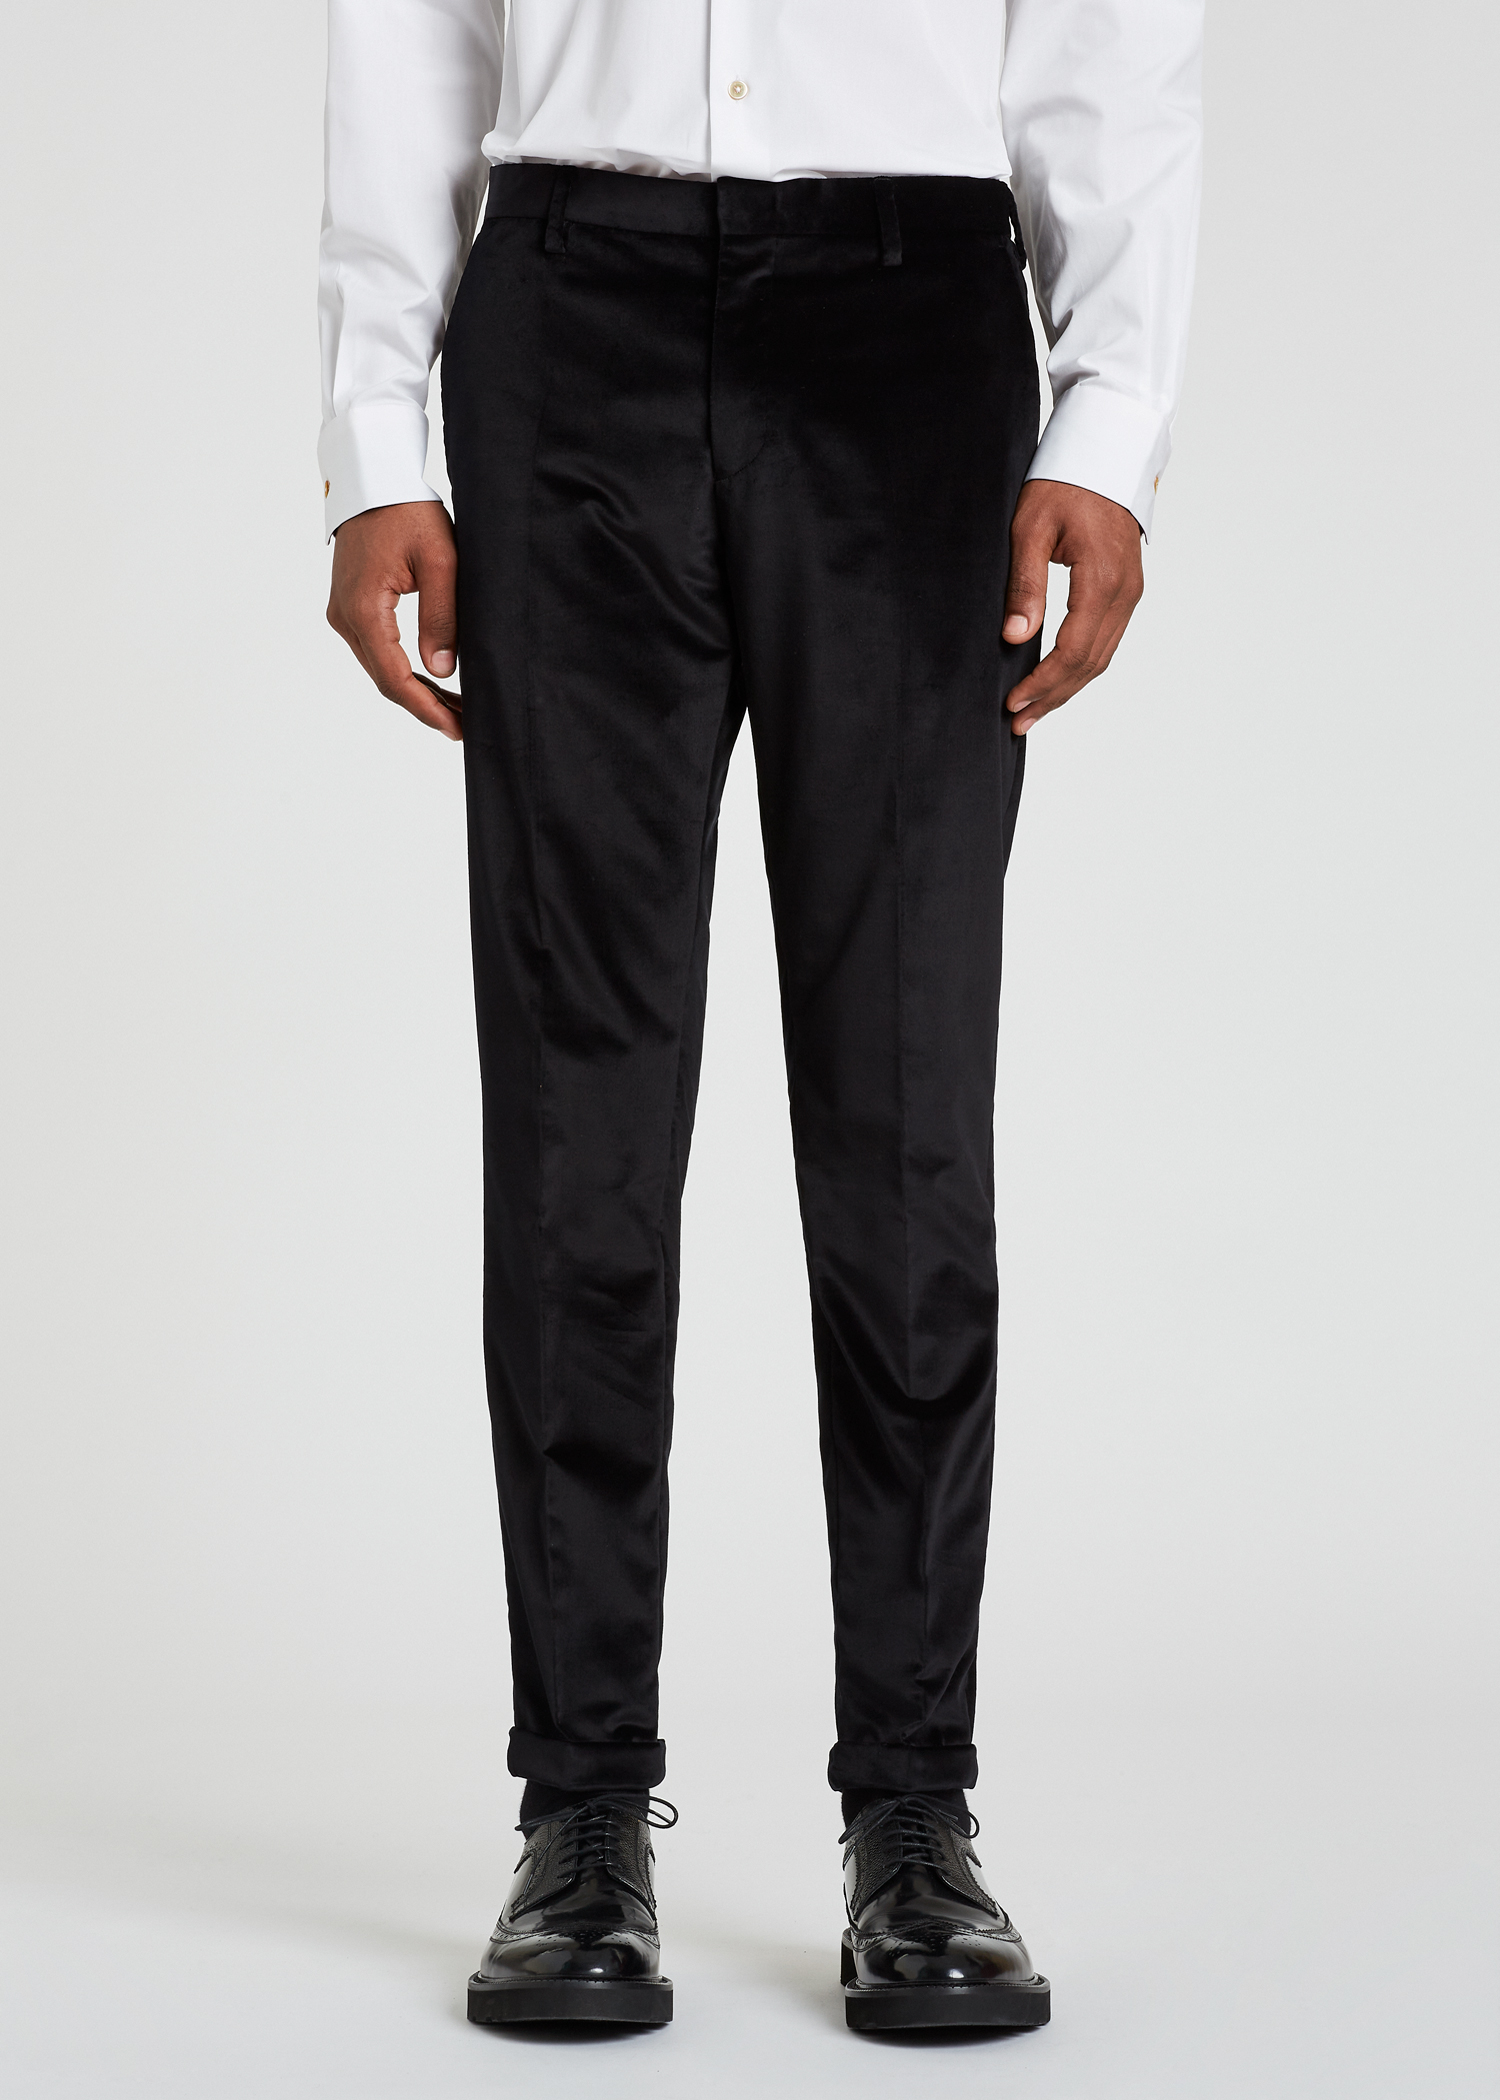 Buy PUMA Black Cotton Regular Fit Mens Track Pants | Shoppers Stop-cheohanoi.vn